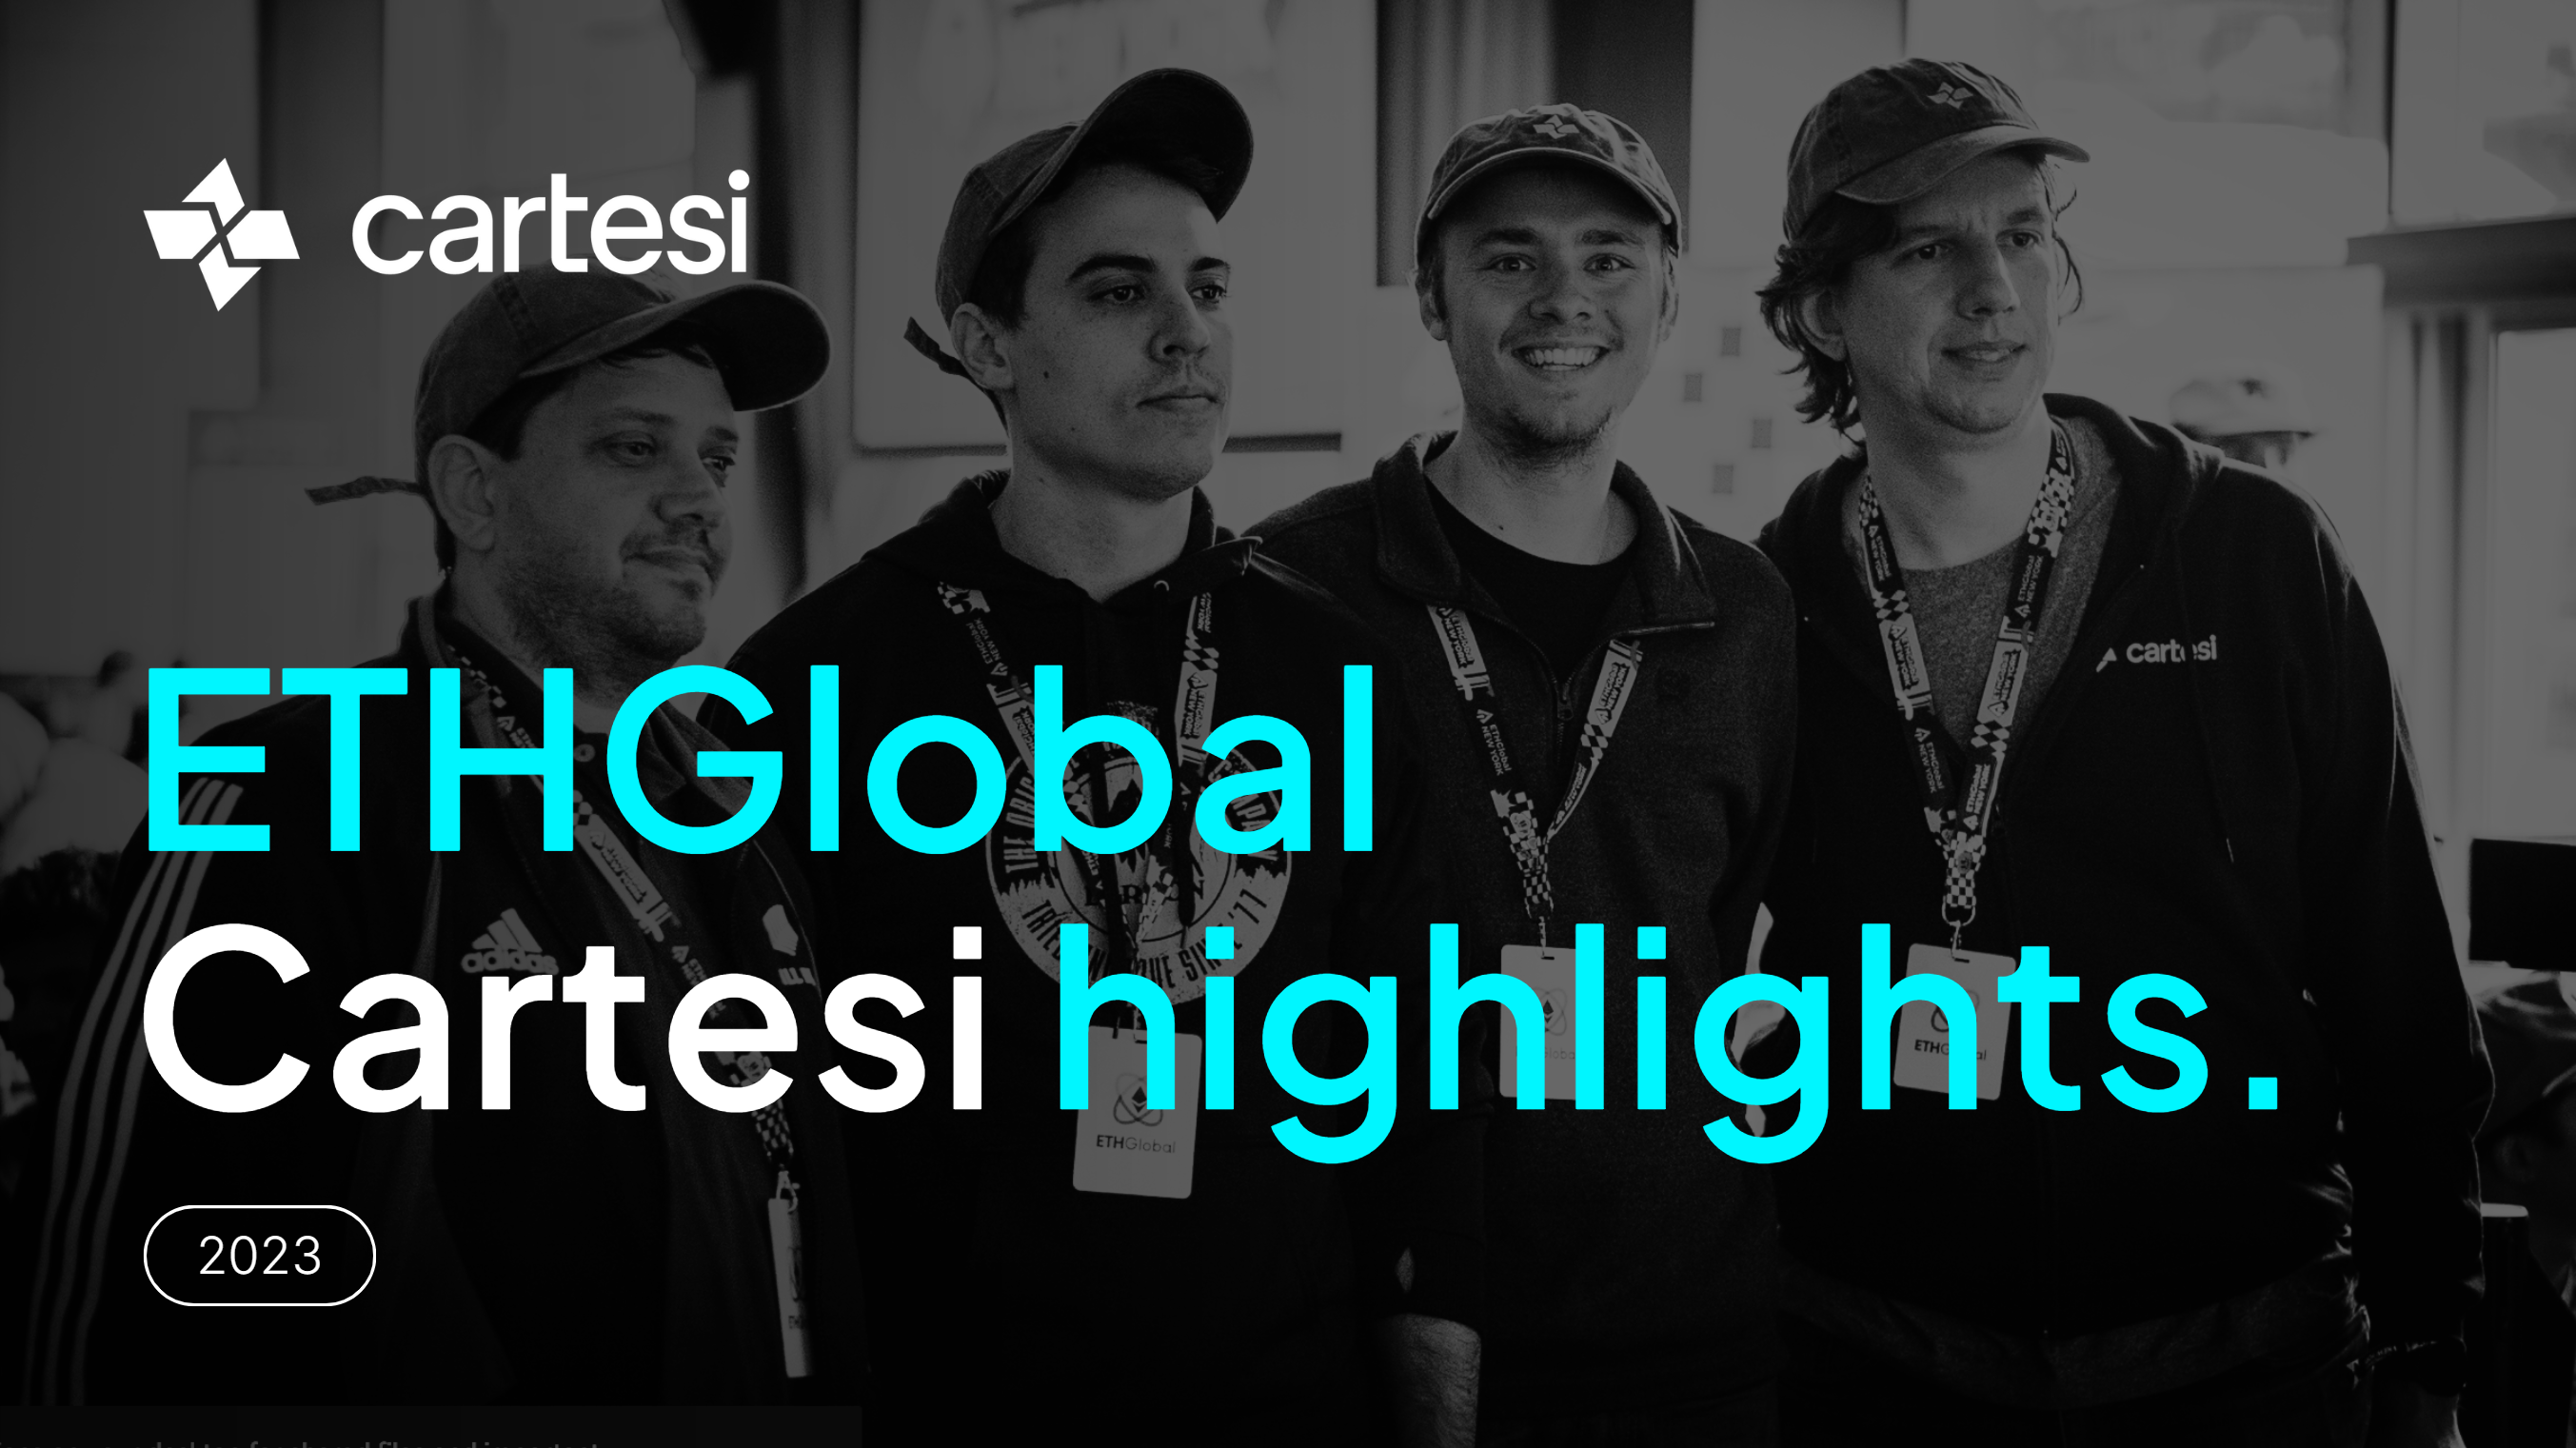 Shining a spotlight on all the ETHGlobal winners who’ve built with Cartesi over the past year.